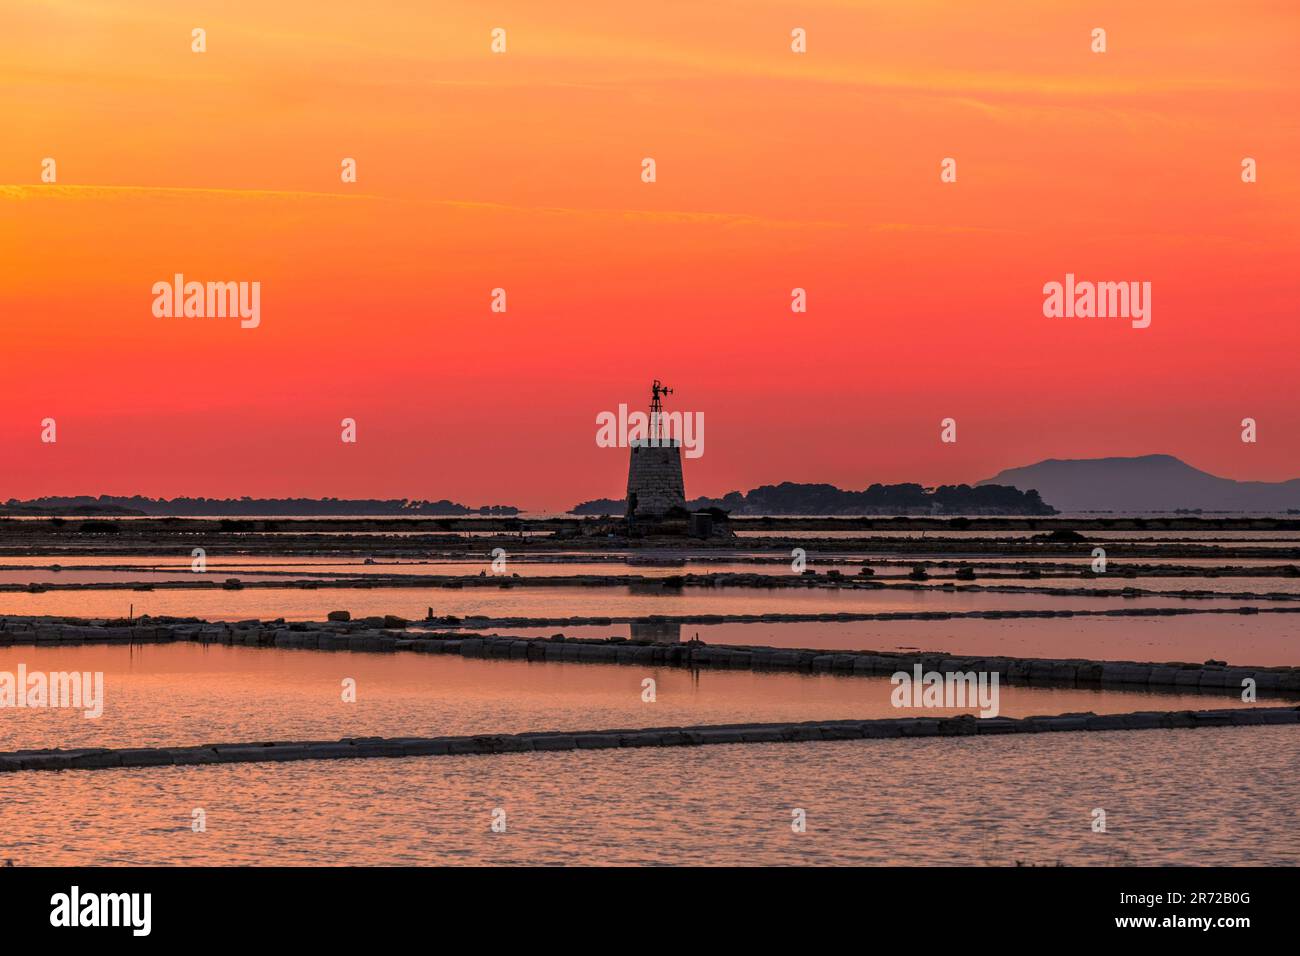 Sunset at the salt flats with the old windmill, saline dello Stagnone. Marsala, Trapani, Sicily, Italy, Europe. Stock Photo